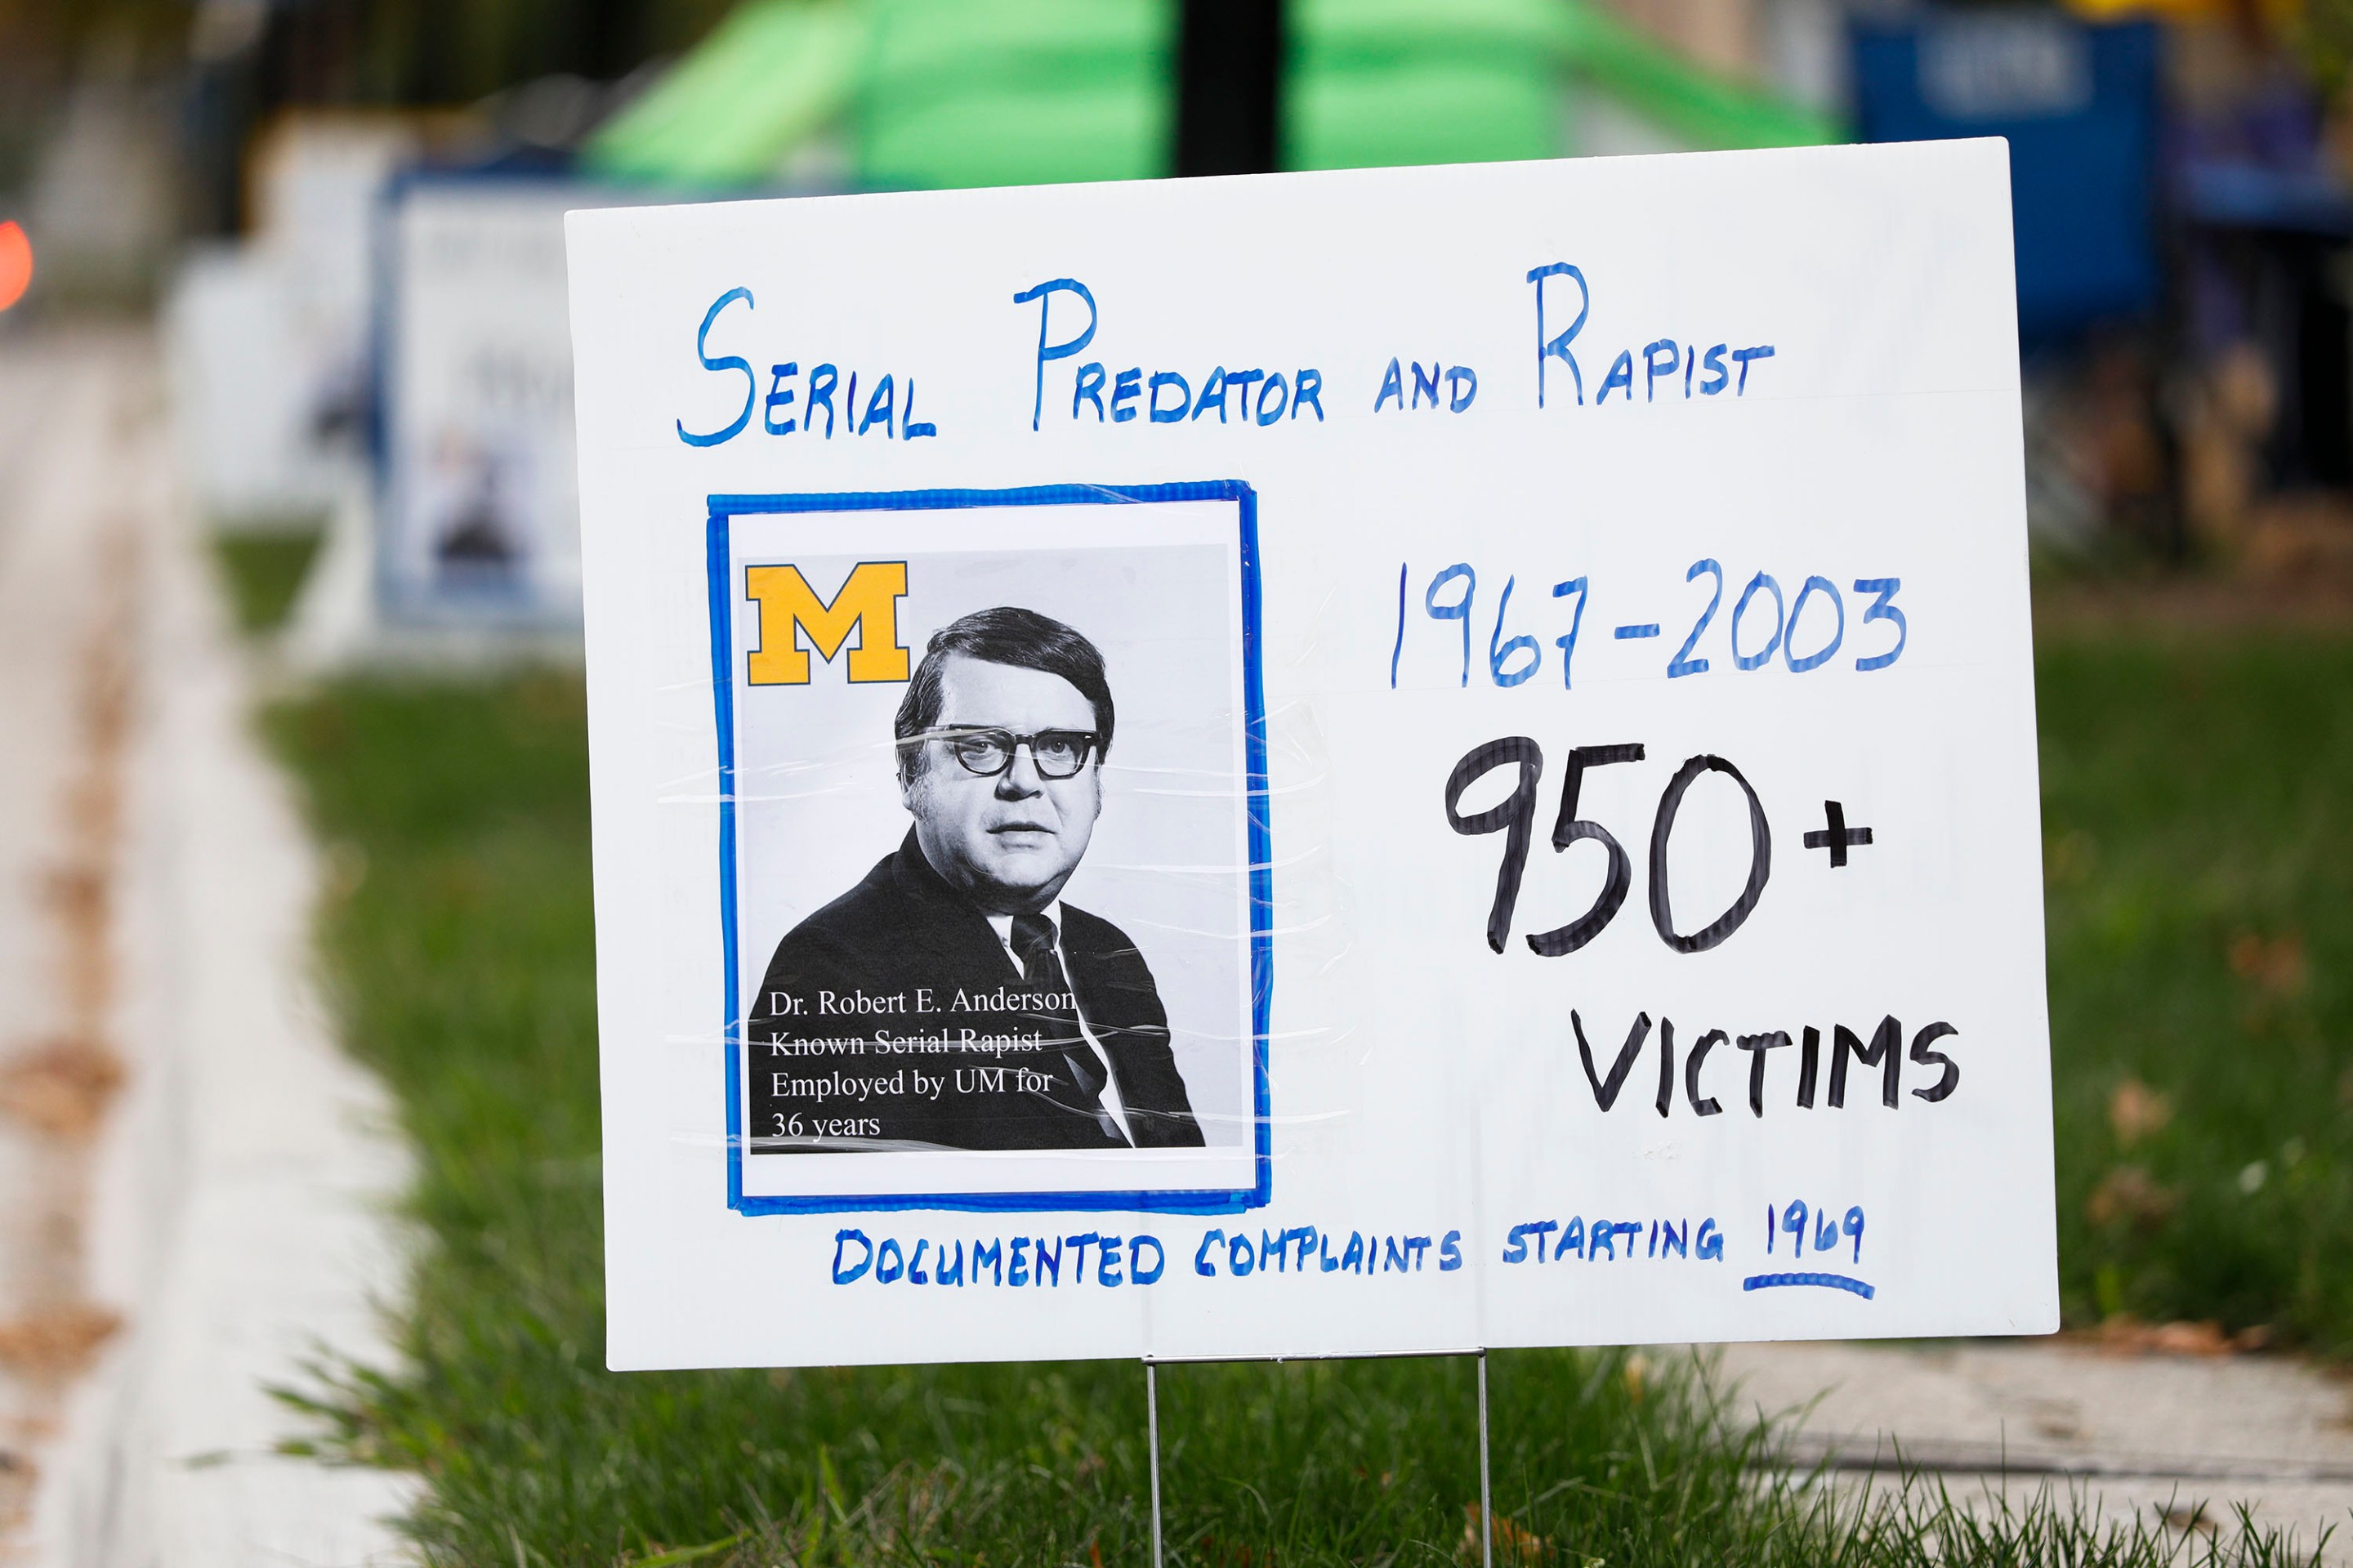 ANN ARBOR, MI - OCTOBER 13: A sign referring to former University of Michigan sports doctor Robert Anderson is on display at a vigil for survivors of sexual abuse in front of the home of outgoing UM President Mark Schlissel October 13, 2021 in Ann Arbor, Michigan. The group says it is standing in solidarity with sexual abuse victims of Anderson, U.S. Women's Gymnastics team doctor Larry Nassar, actor Bill Cosby and others.